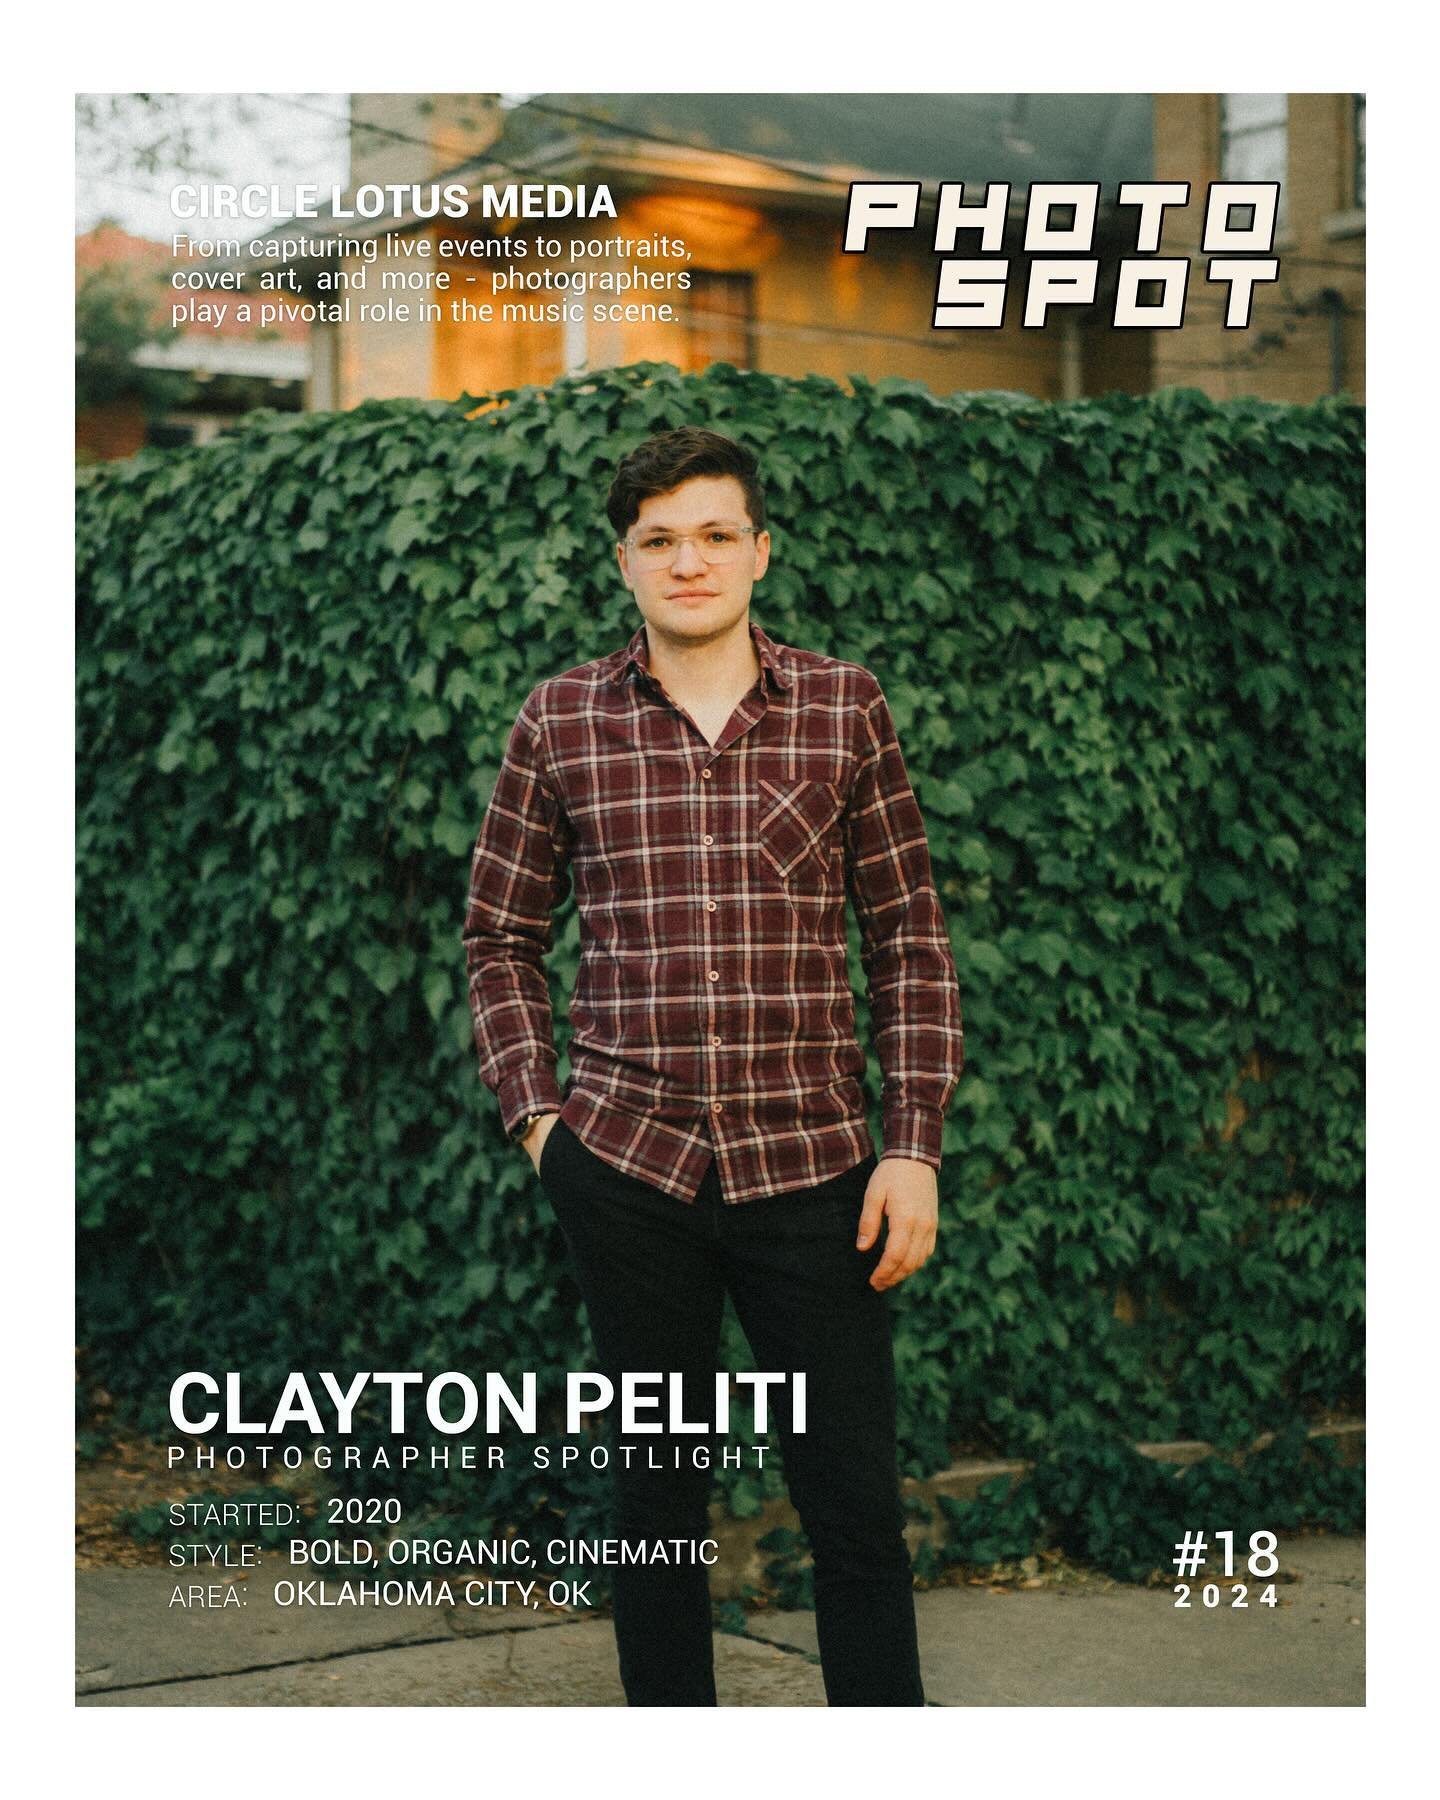 Photospot #18 📷 Clayton Peliti is a photographer in the Oklahoma City area with a bold and organic style.

Clayton began his photography journey during a time of extreme burnout in college. Halfway through completing his bachelor&rsquo;s degree, he 